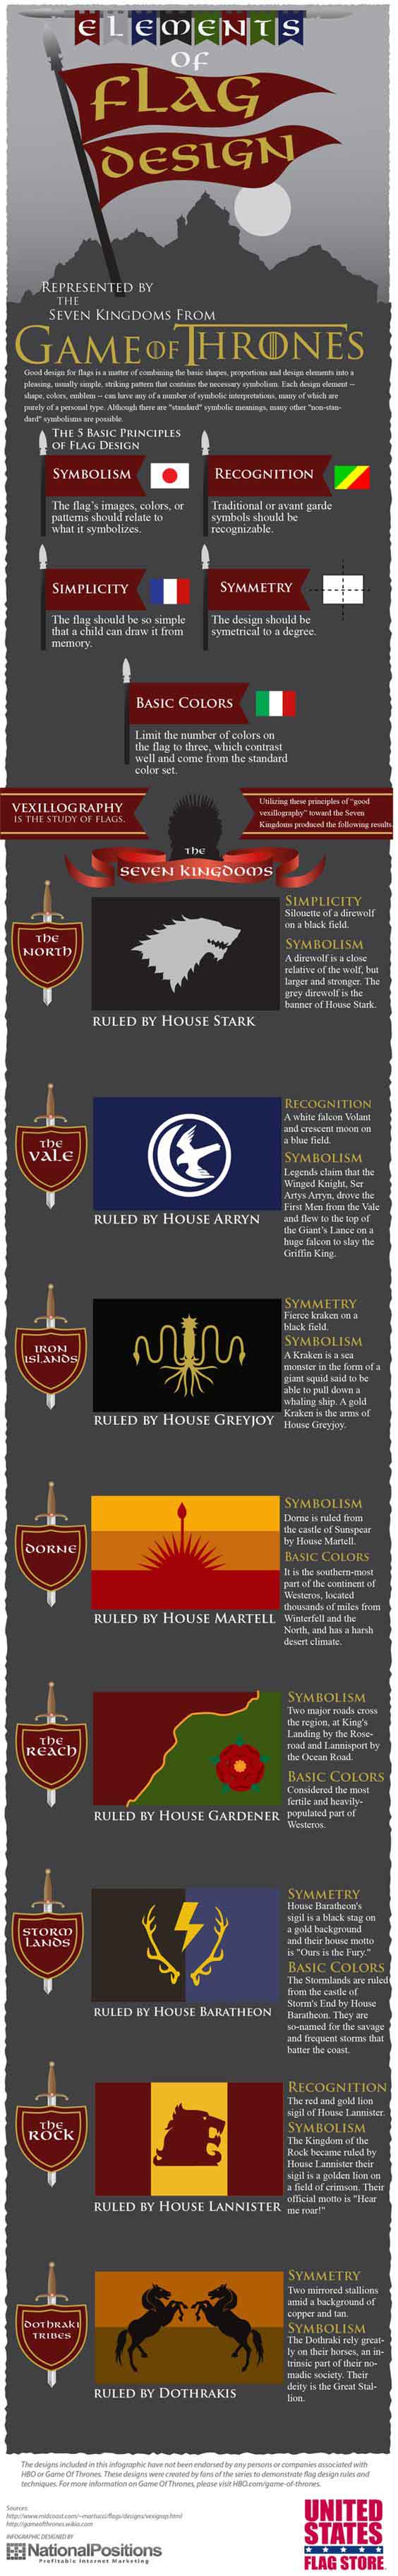 Game of Thrones Flags